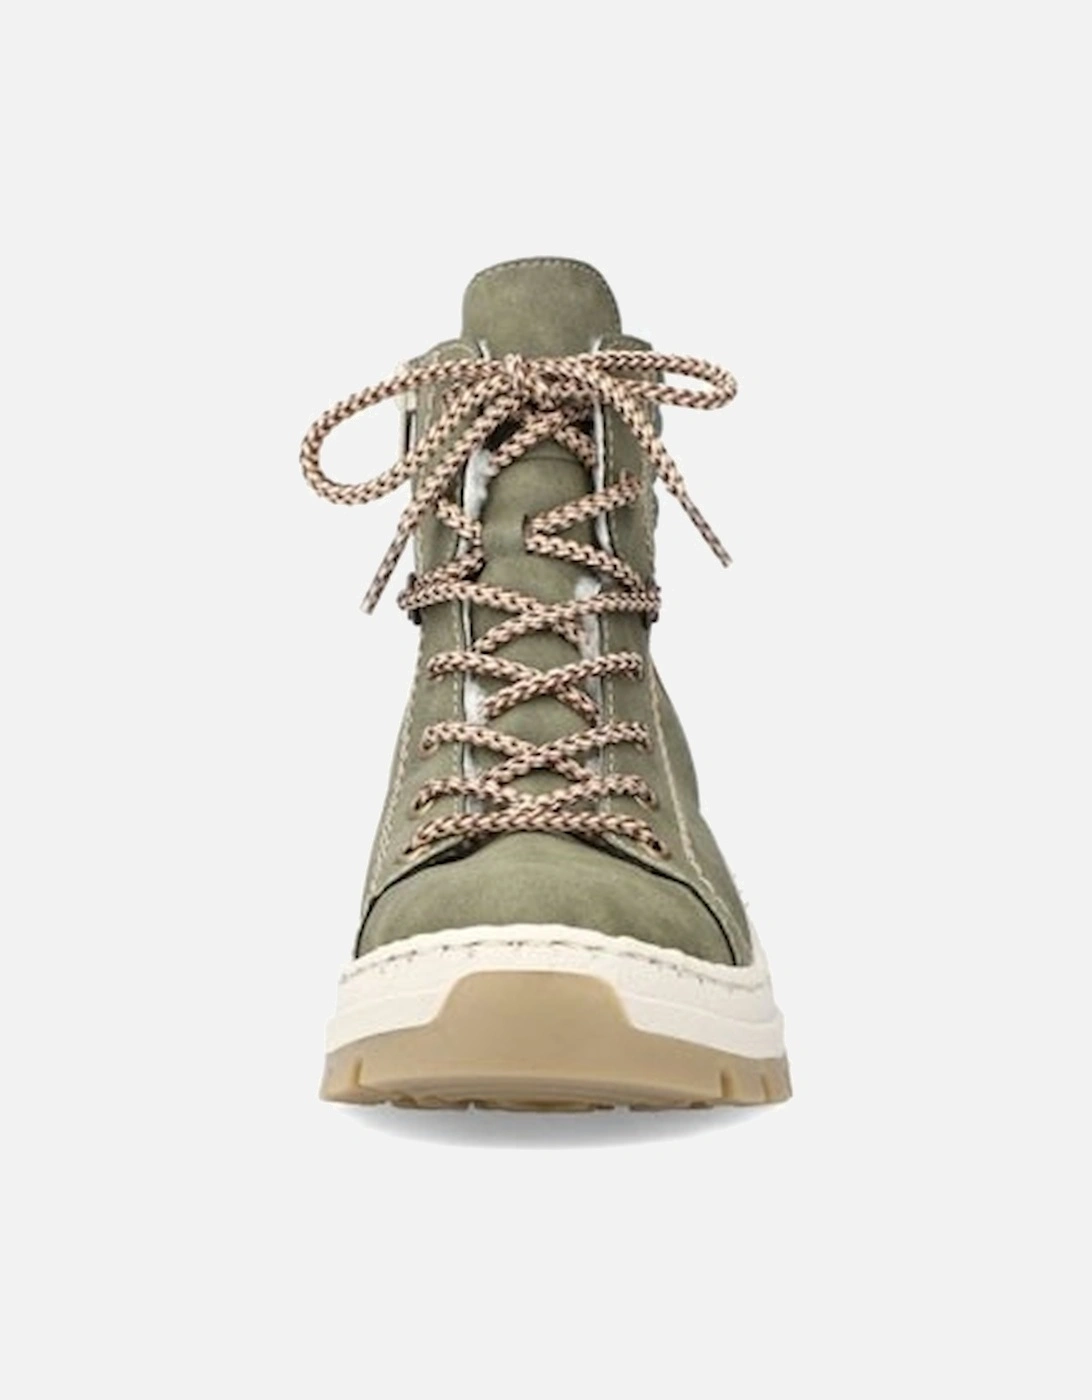 Women's Zipper Ankle Boots Olive